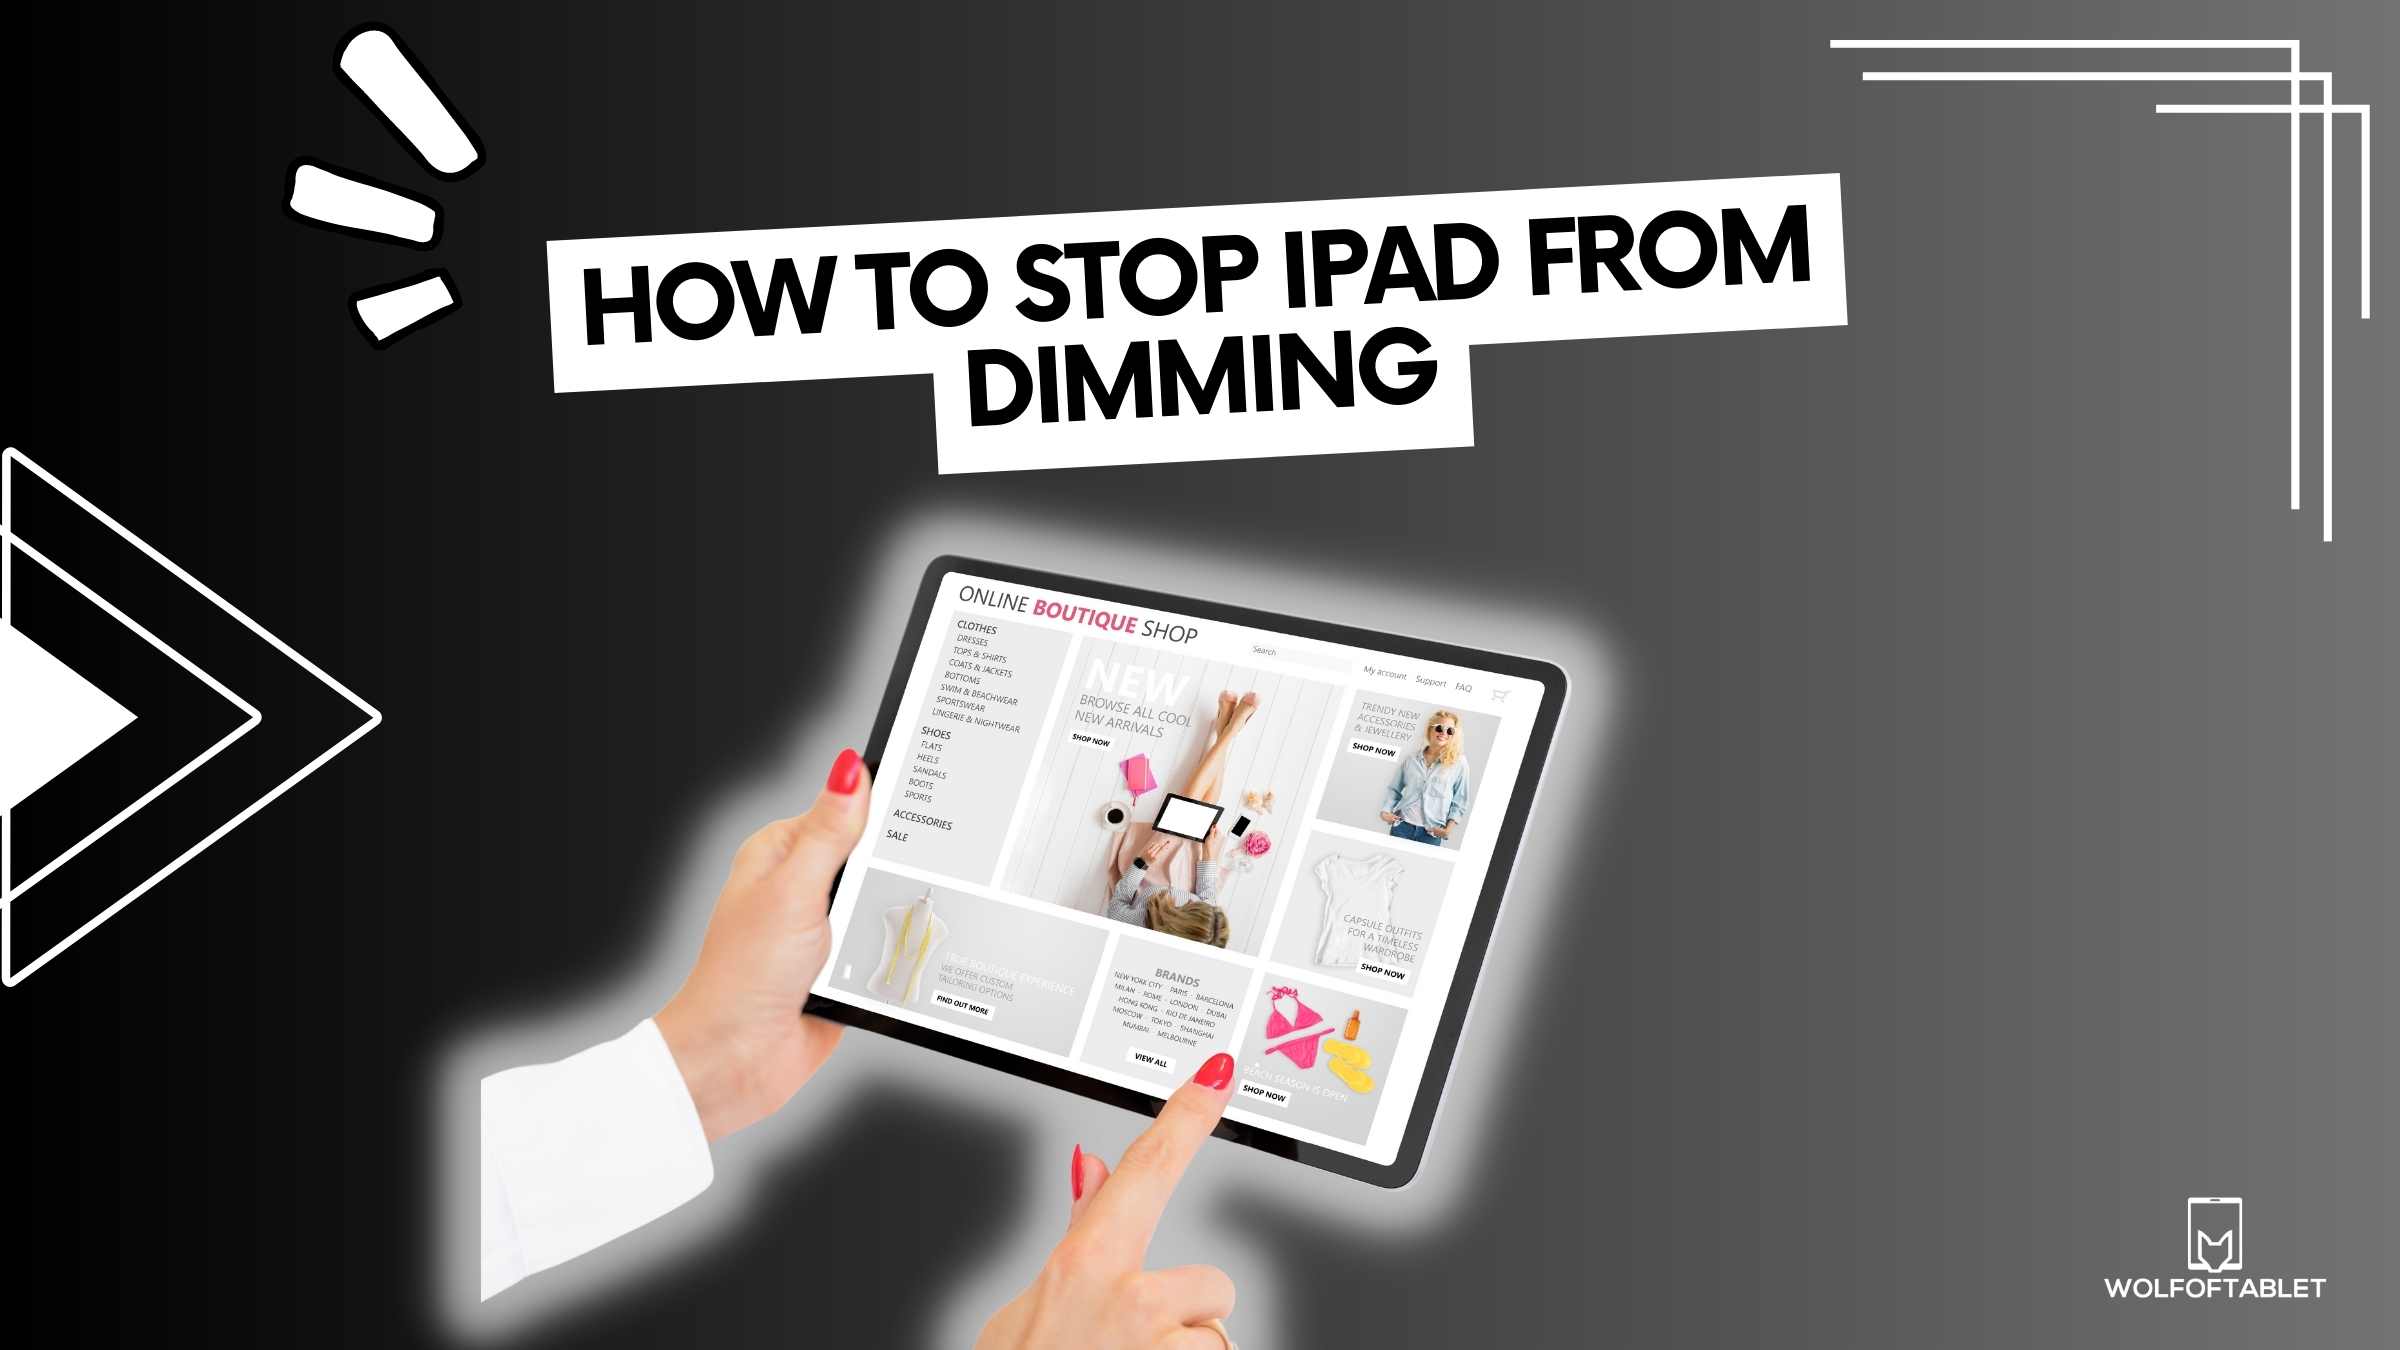 how to stop ipad from dimming - quick and east guide with pictures and video